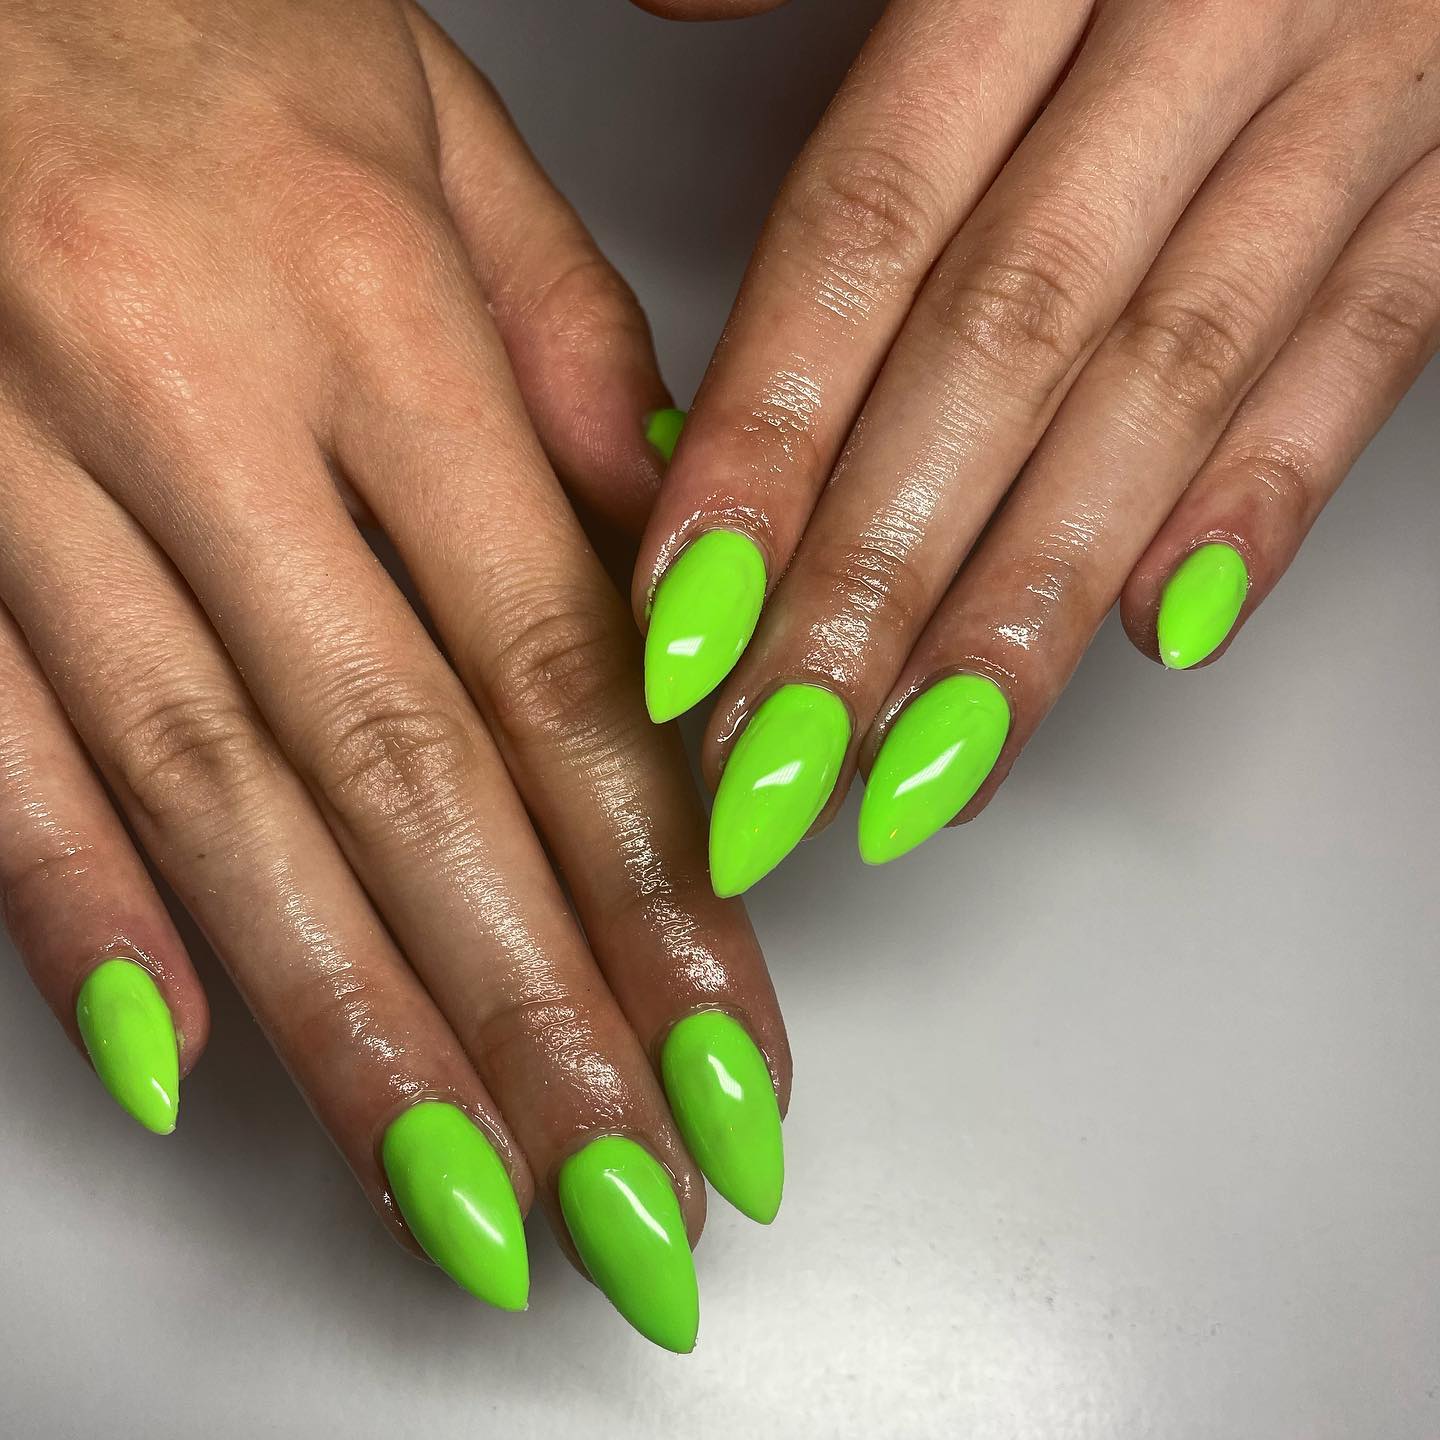 If you want to attract everyone with your nail design, you can do it with this super bright nail art.